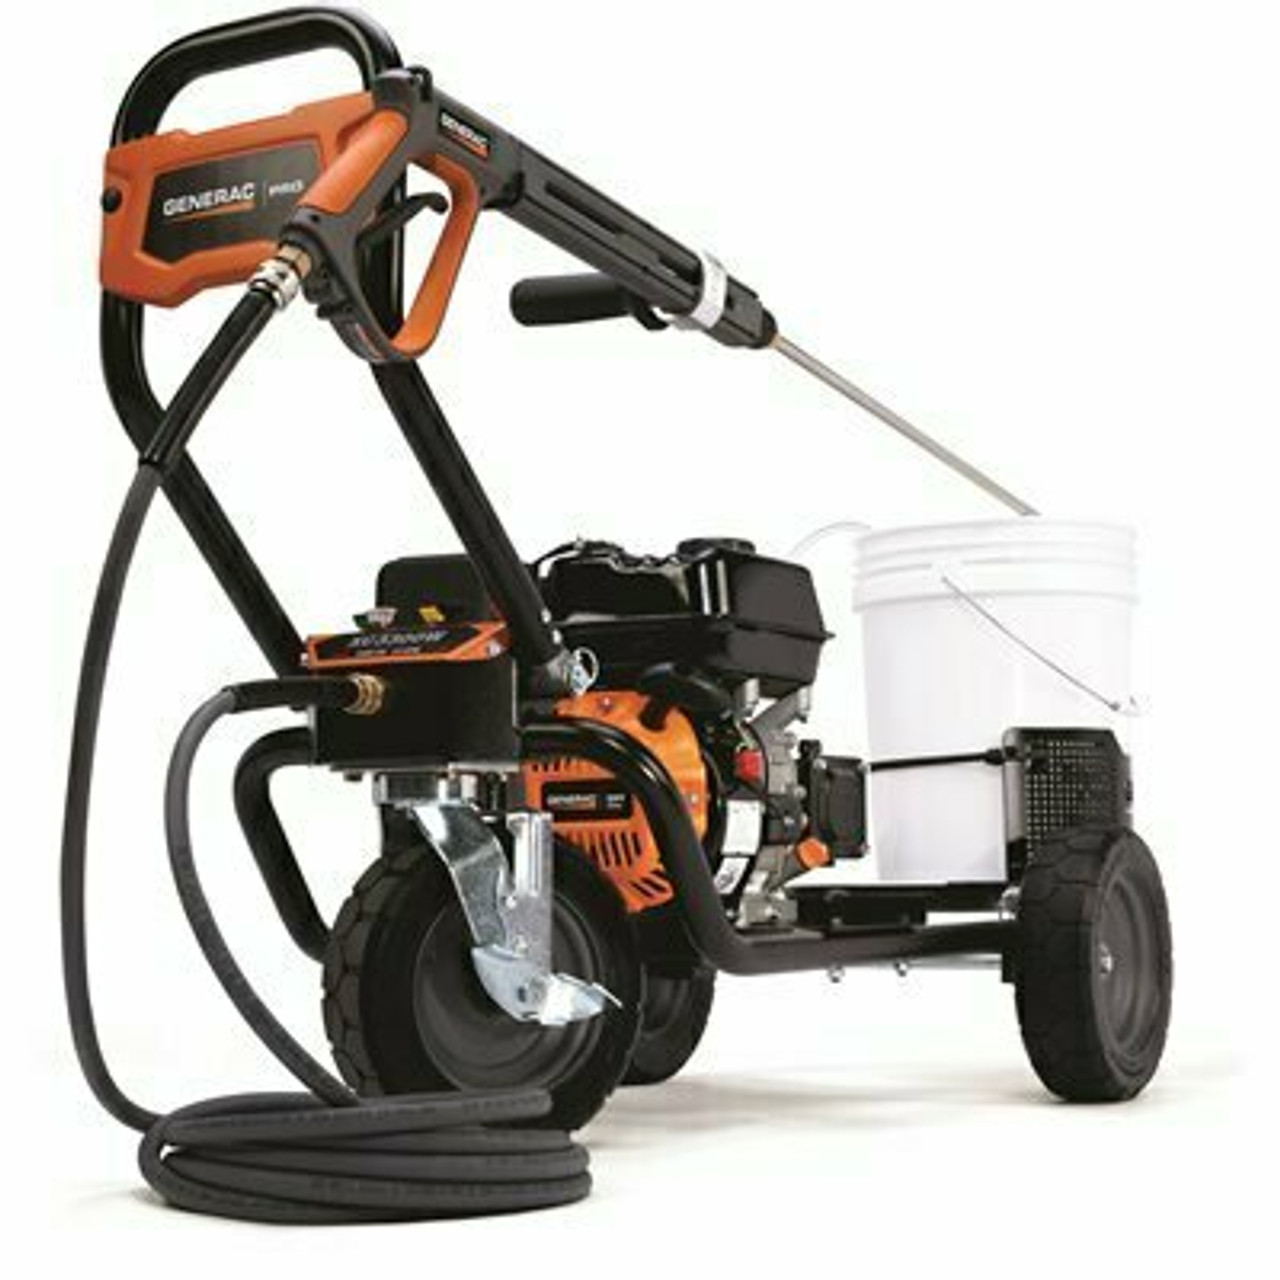 Generac Xc Series 3300 Psi 3.0 Gpm Commerical Grade Gas Pressure Washer (49-State/Csa)